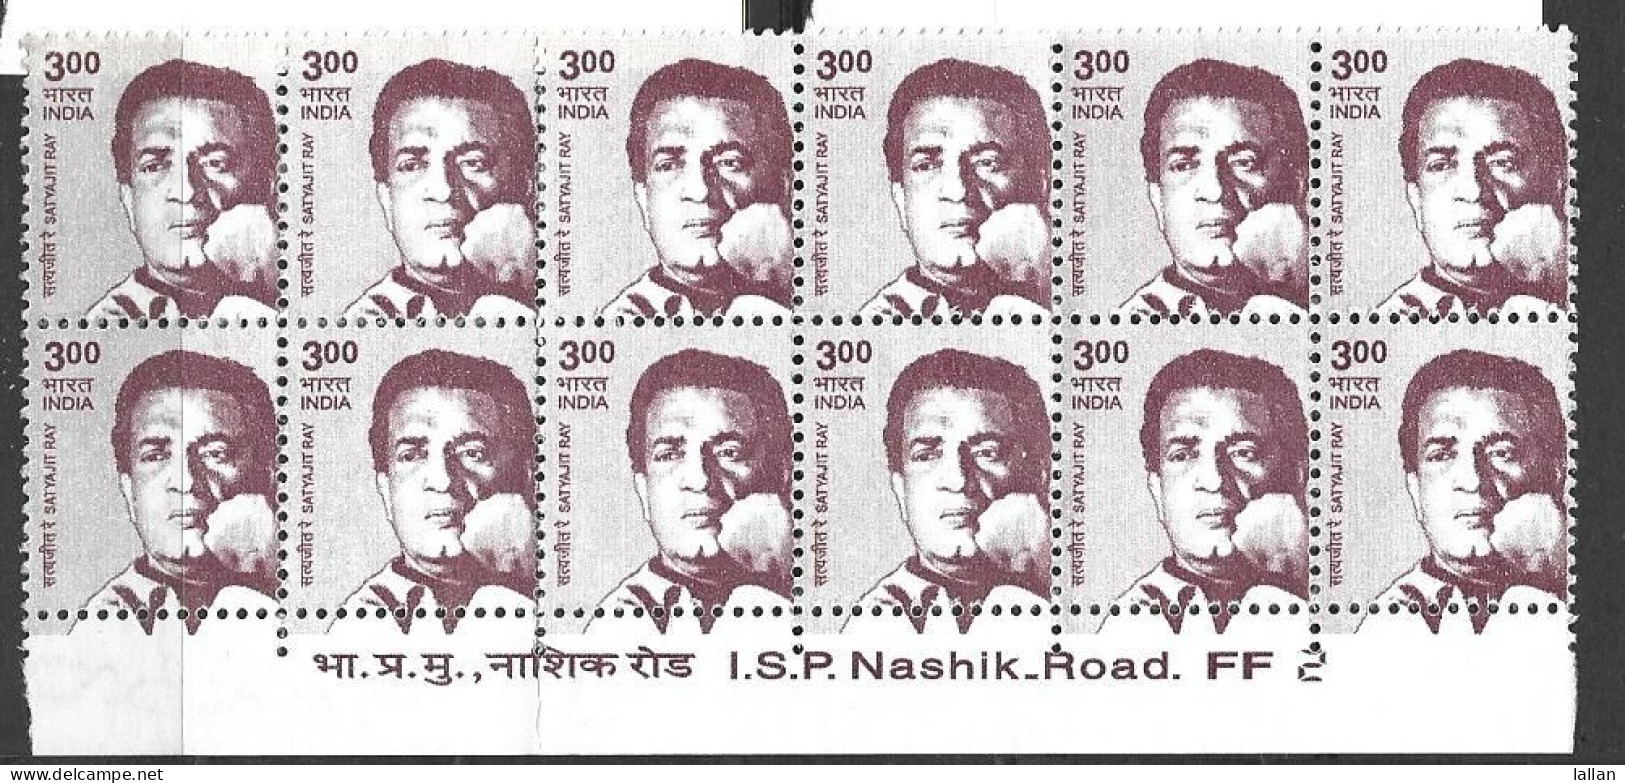 3 Blk Of 4, MNH, Satyajeet Ray, Life Time Acheivement Oscar, Cinema, Condition As Per Scan - Ungebraucht